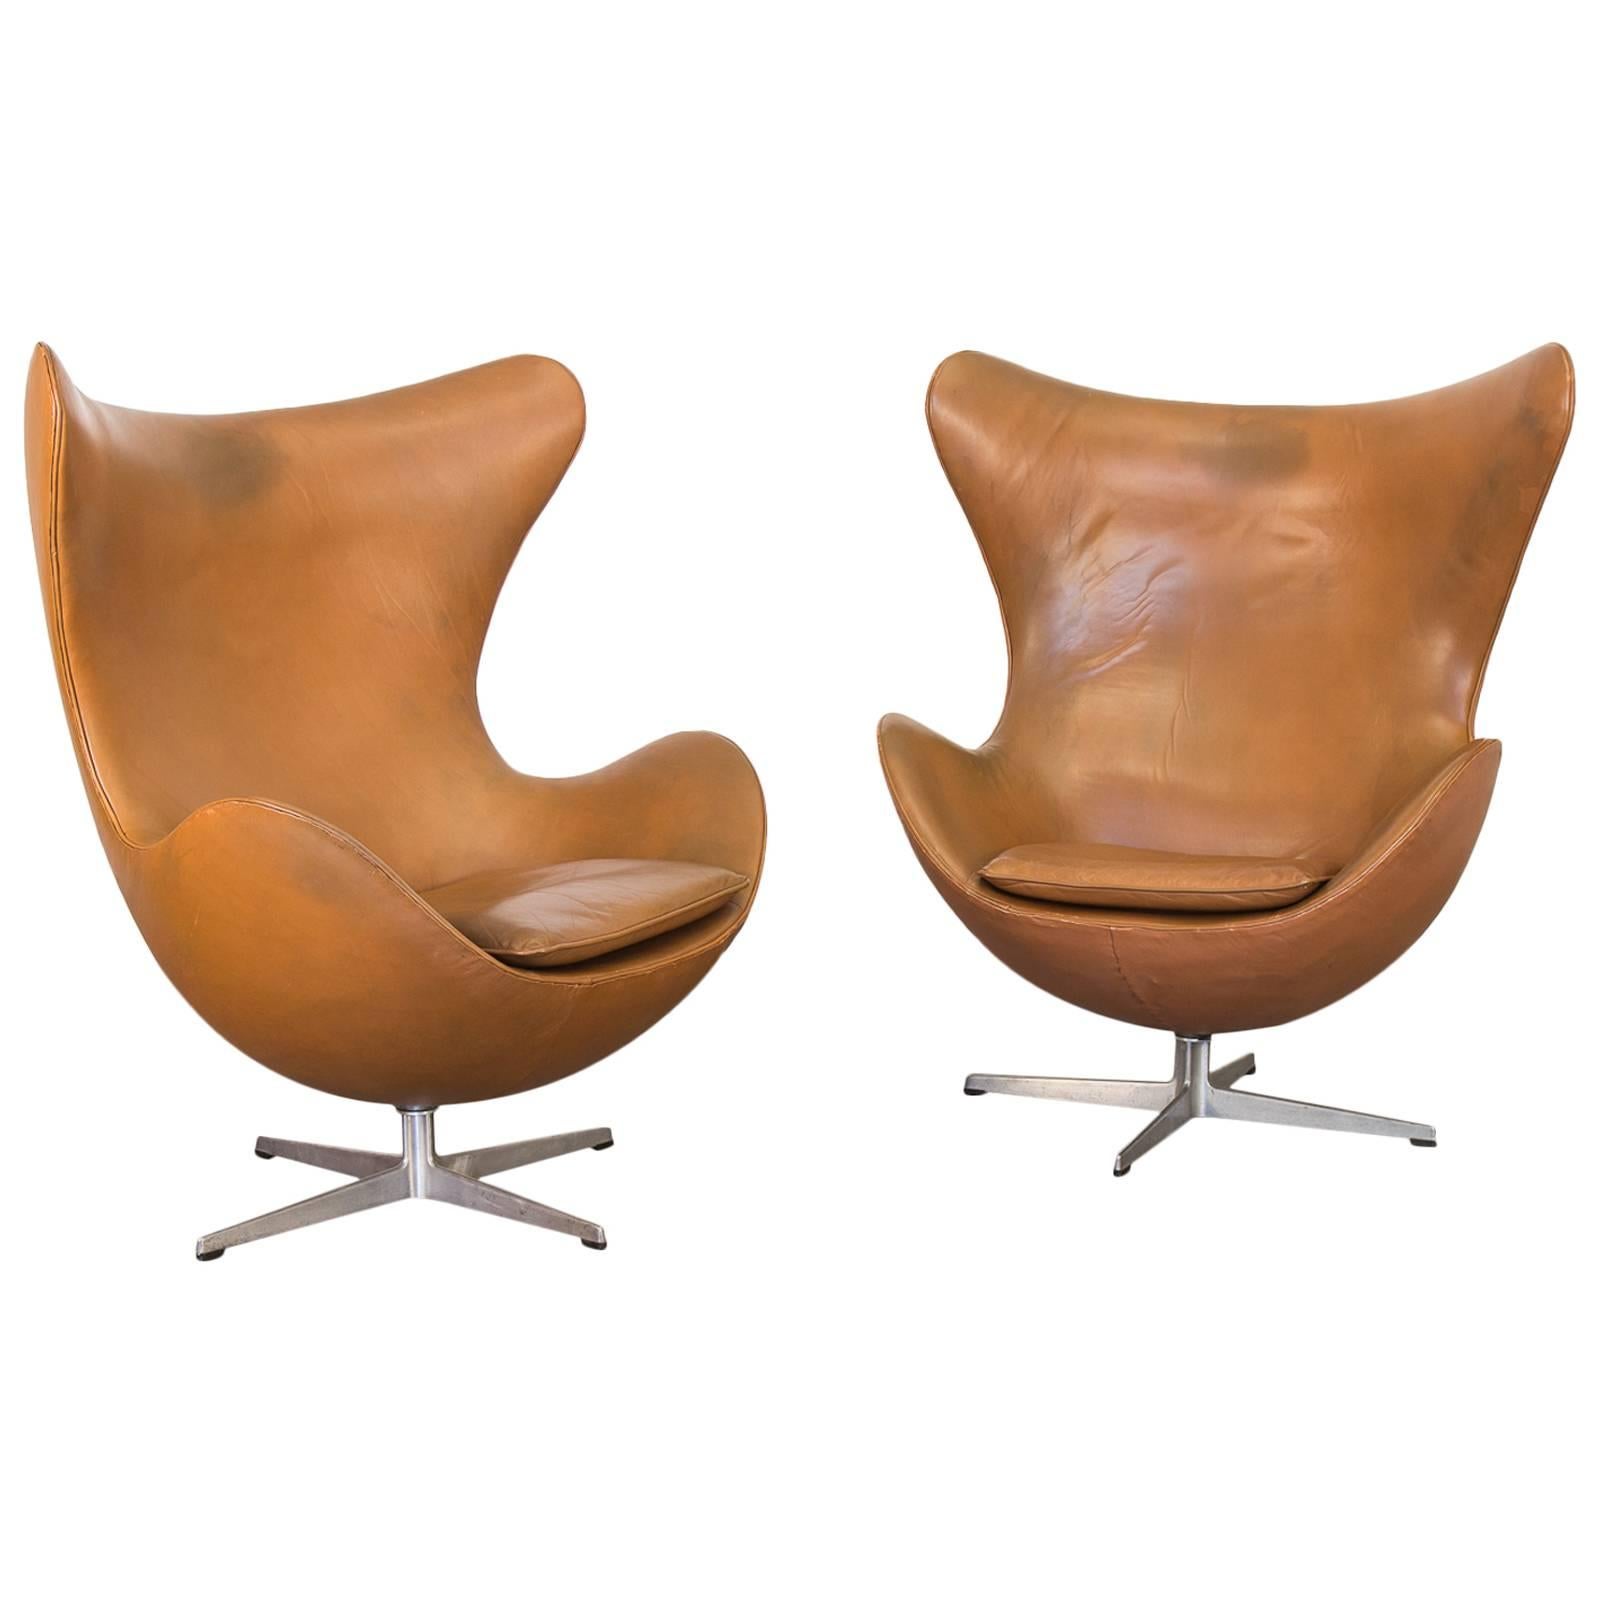 Vintage Leather Egg Chairs by Arne Jacobsen